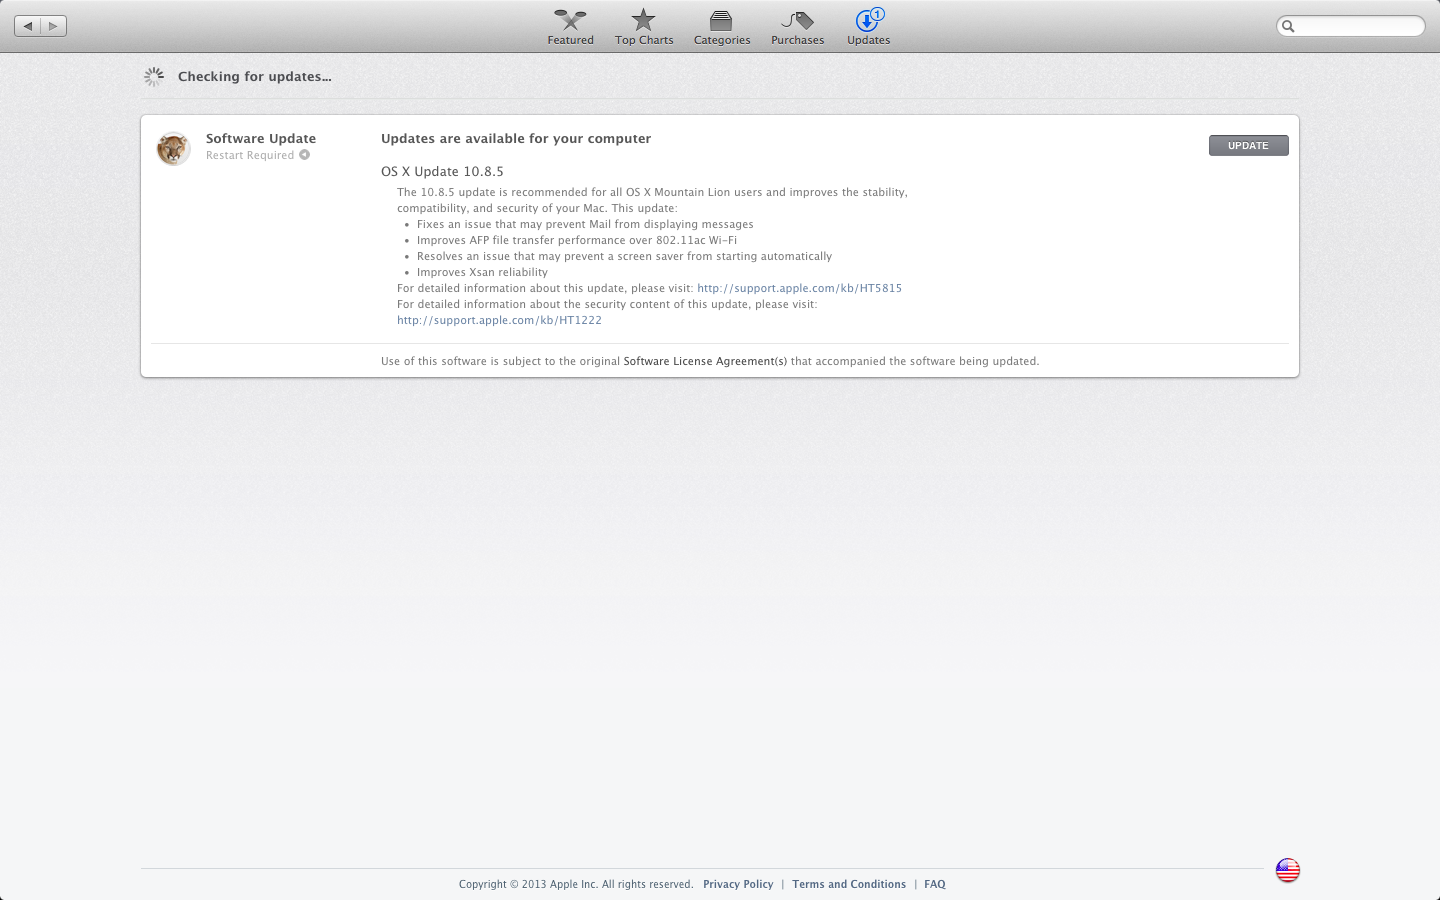 Apple releases OS X 10.8.5 with fixes for several bugs